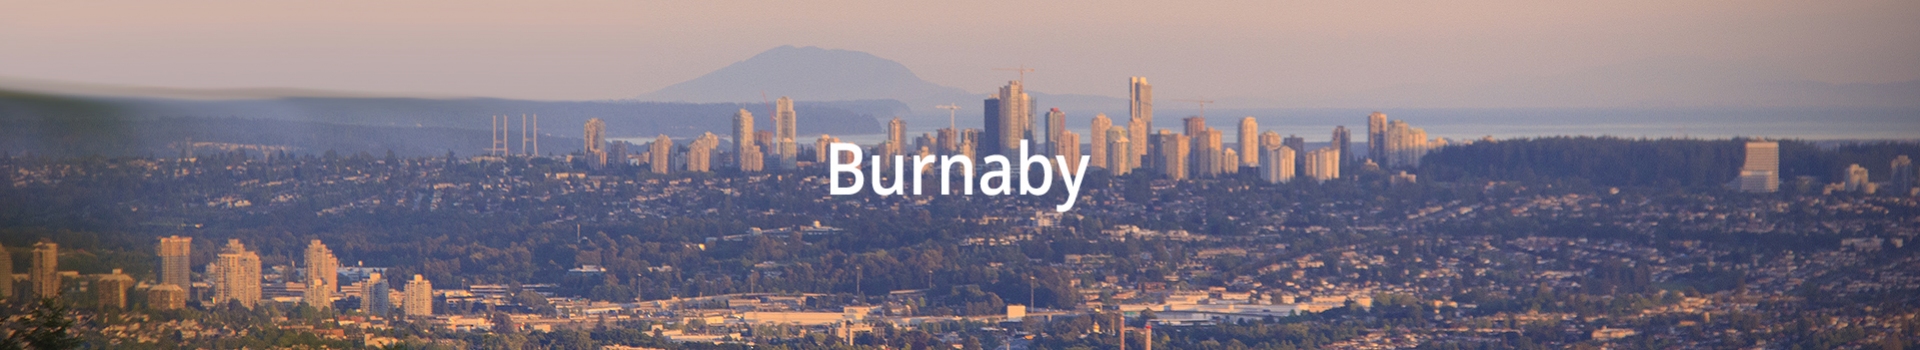 notary-services-burnaby-mobile-coquitlam